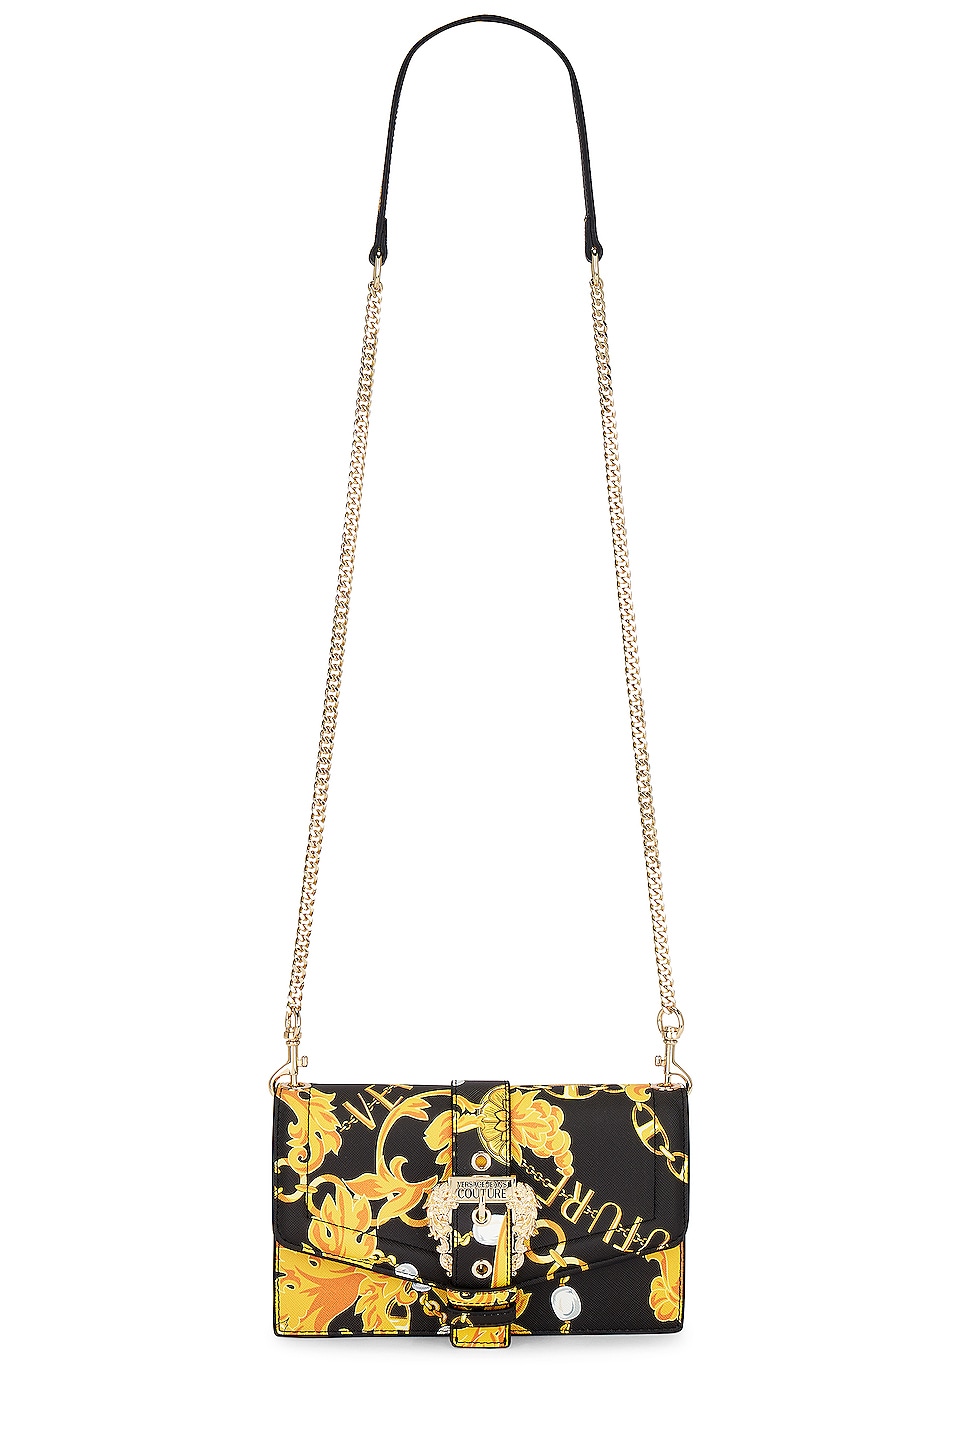 Chain Couture Crossbody Bag